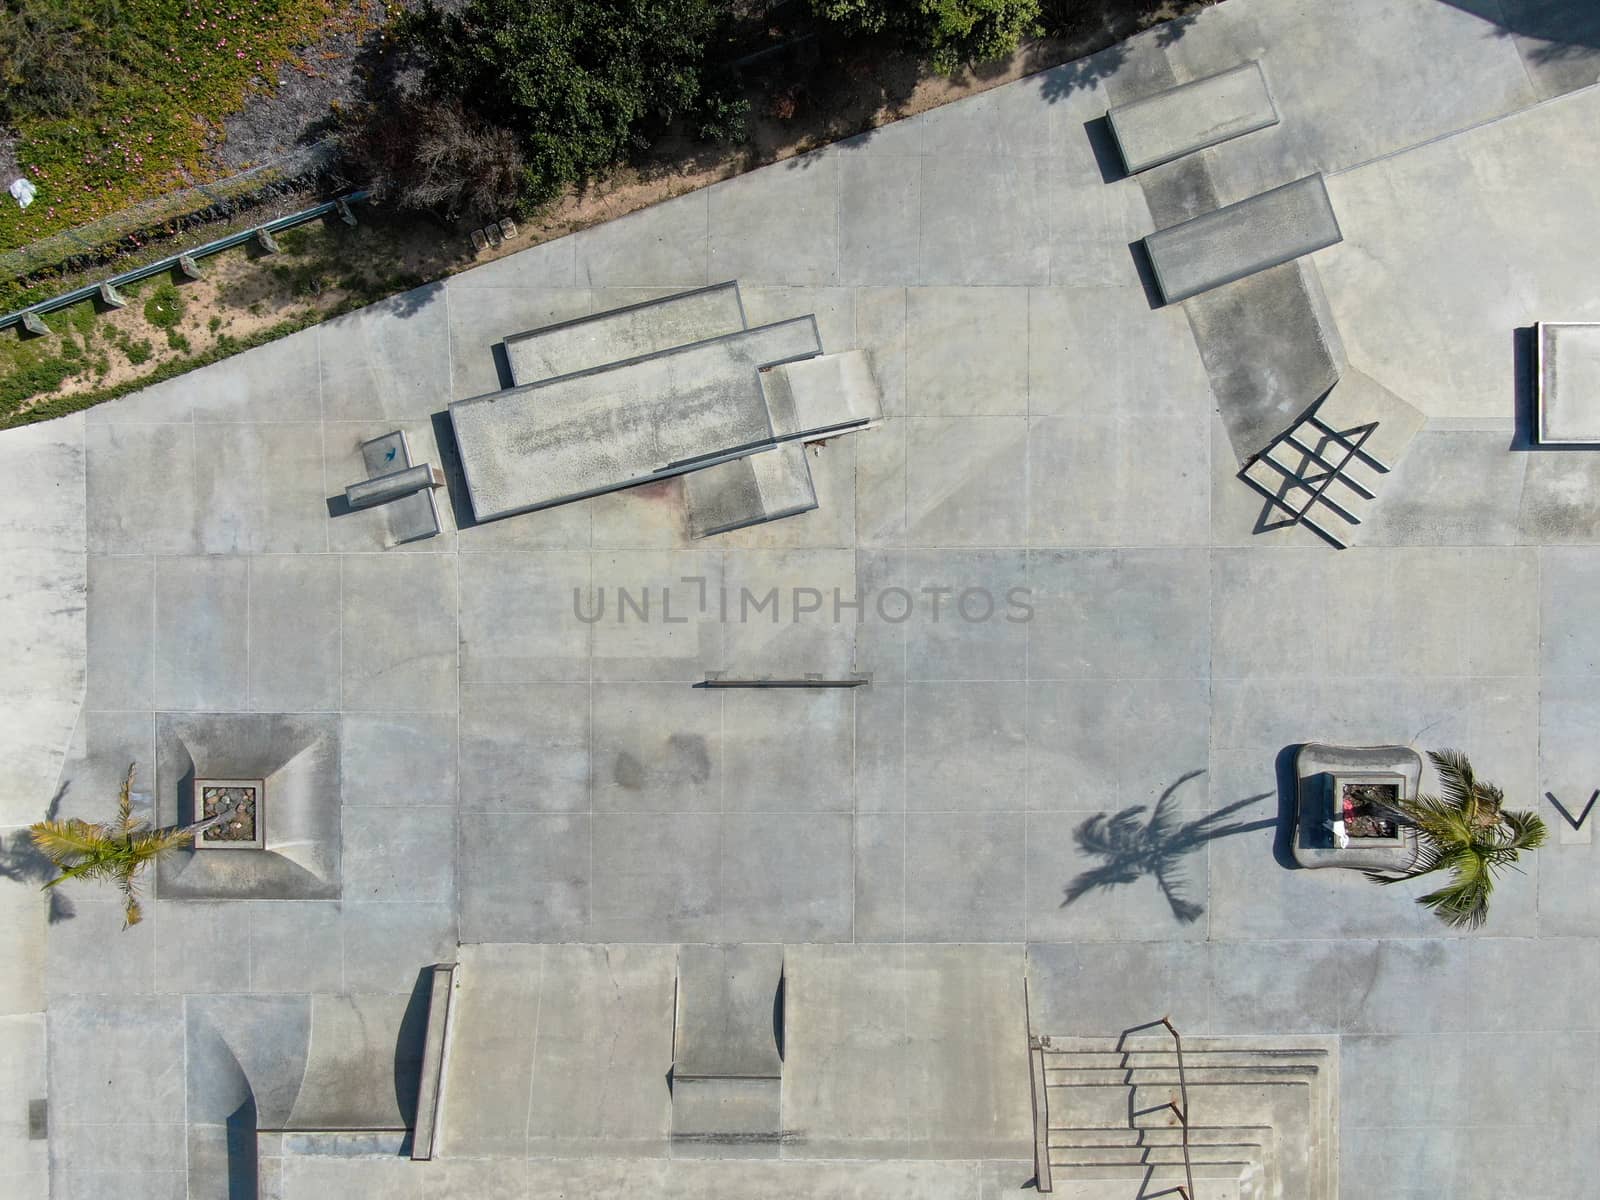 Aerial view of outdoor empty concrete skate park with ramps and pipes in California. USA